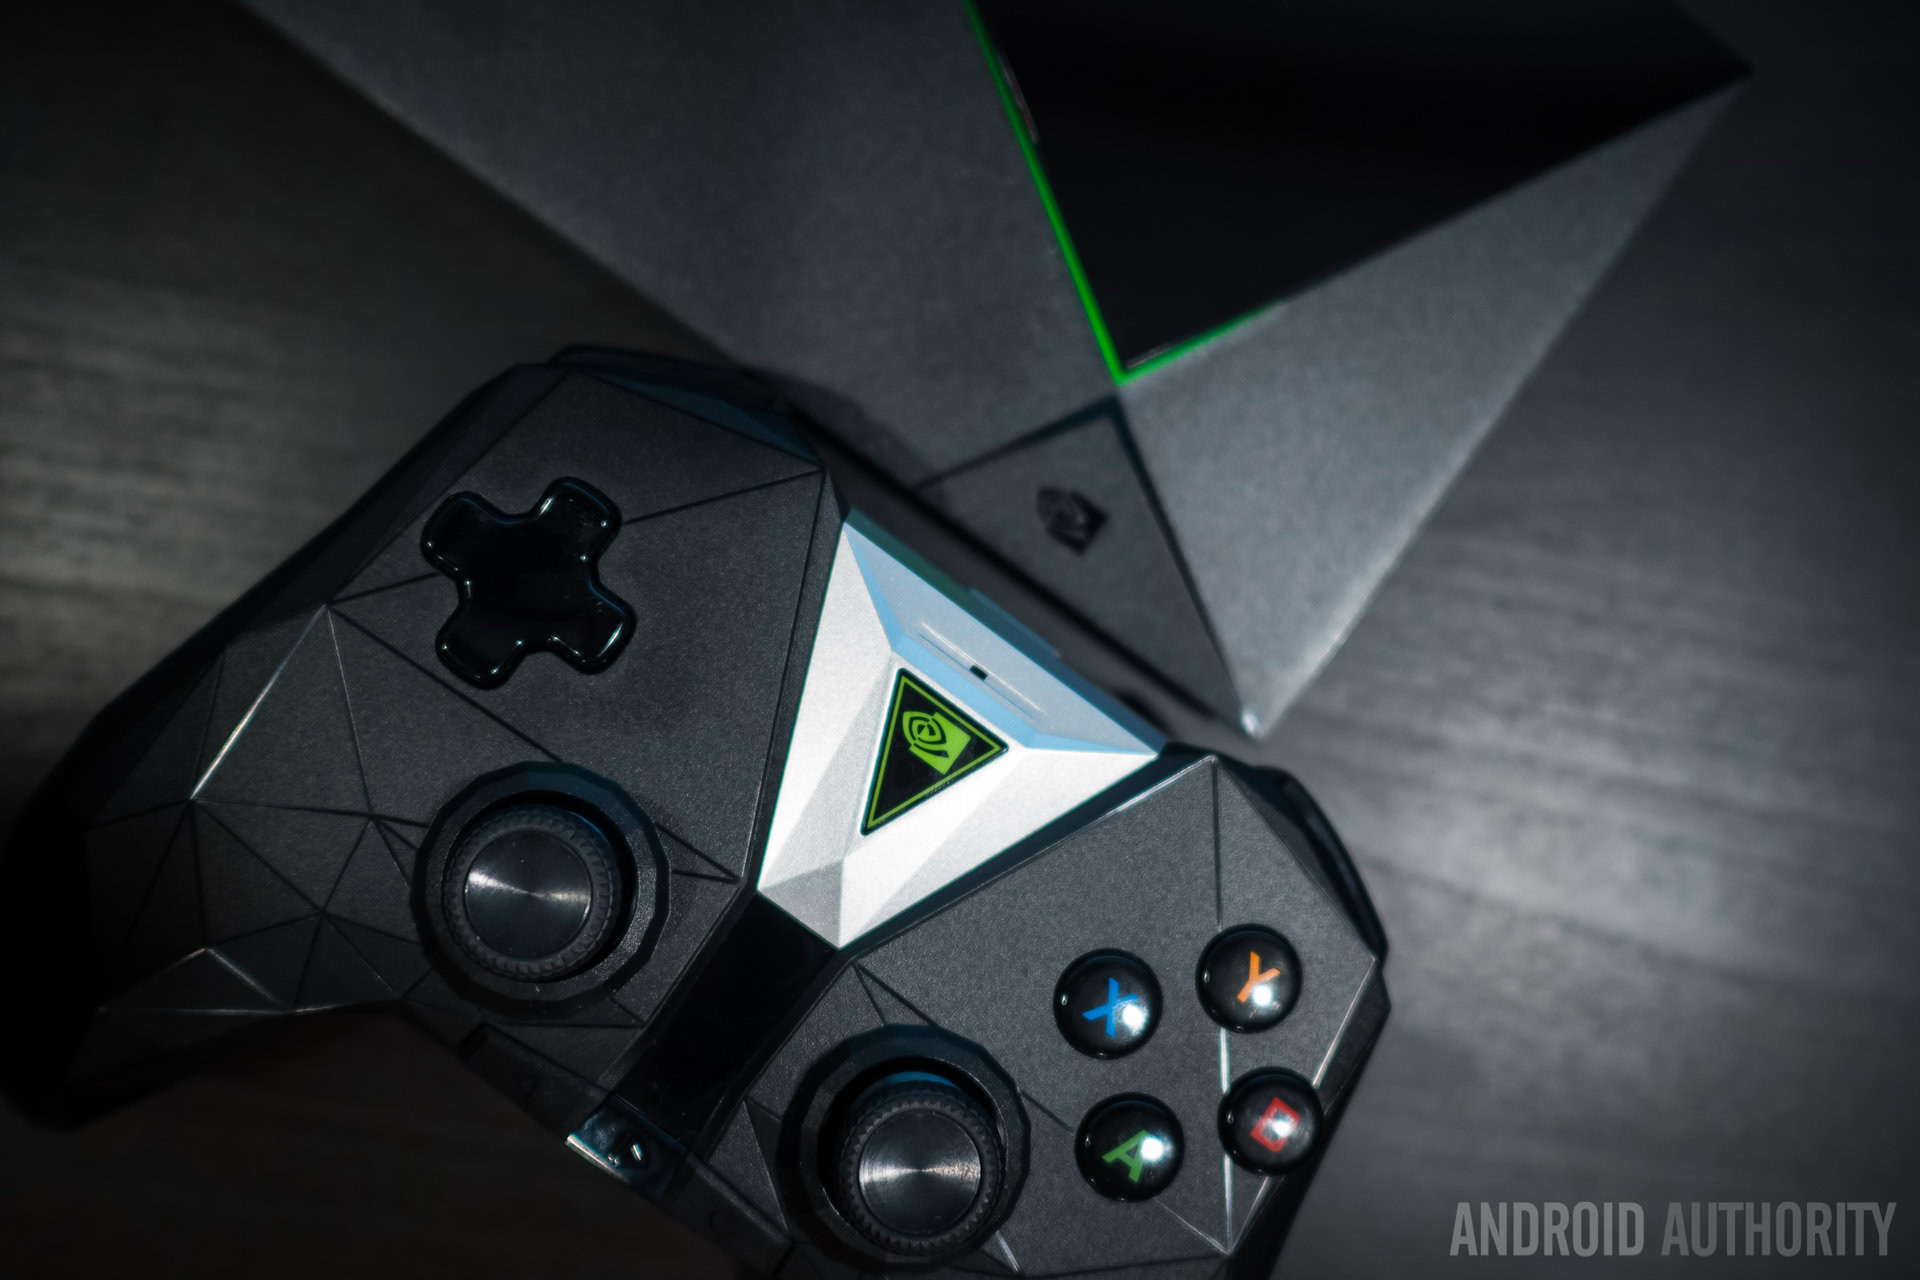 New NVIDIA Shield TV emerges online: Is this more than a minor refresh?